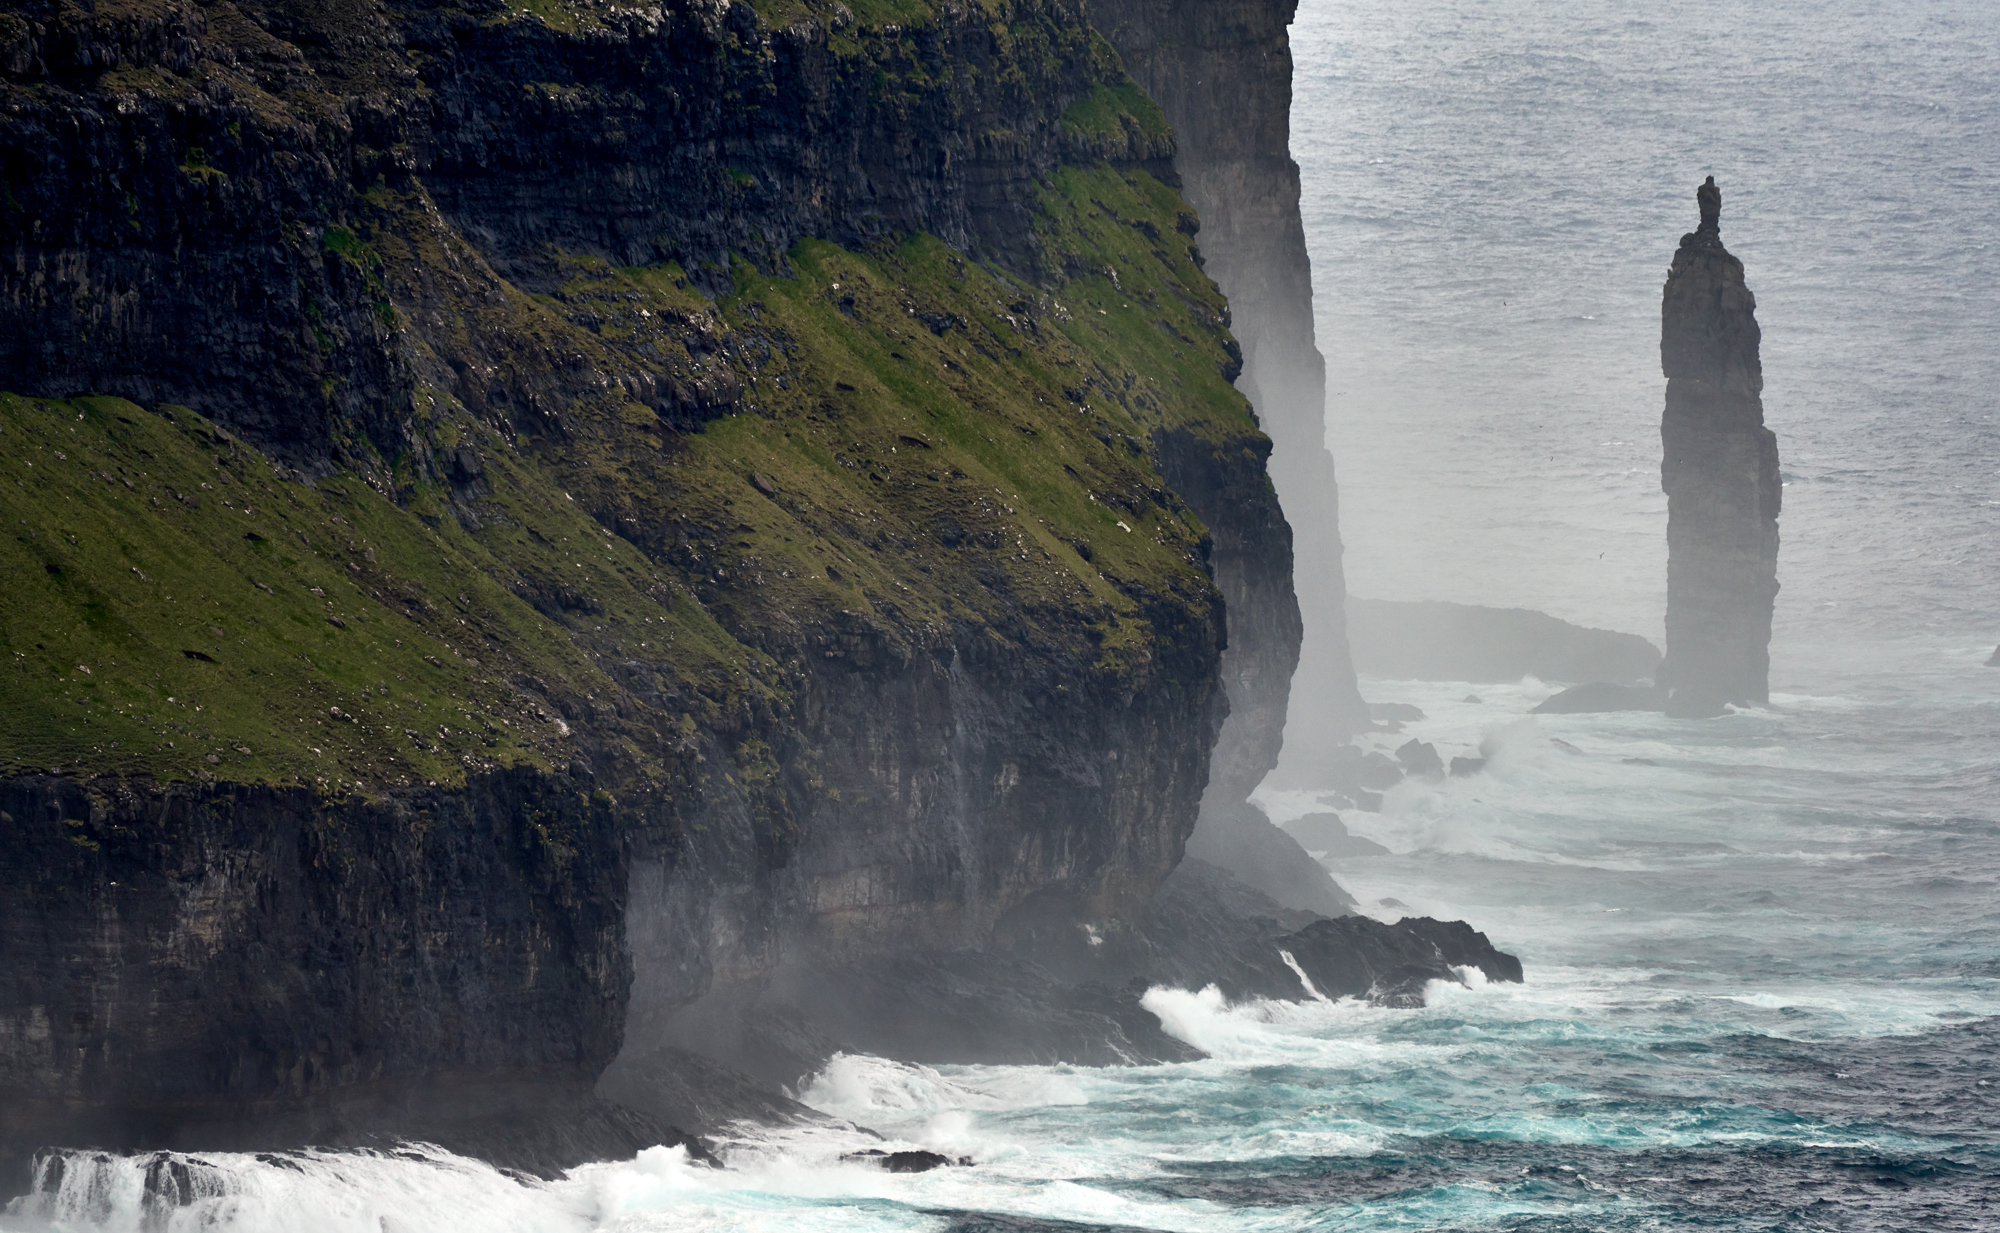 Faroe Islands is all about these giant cliffs and ocean waves